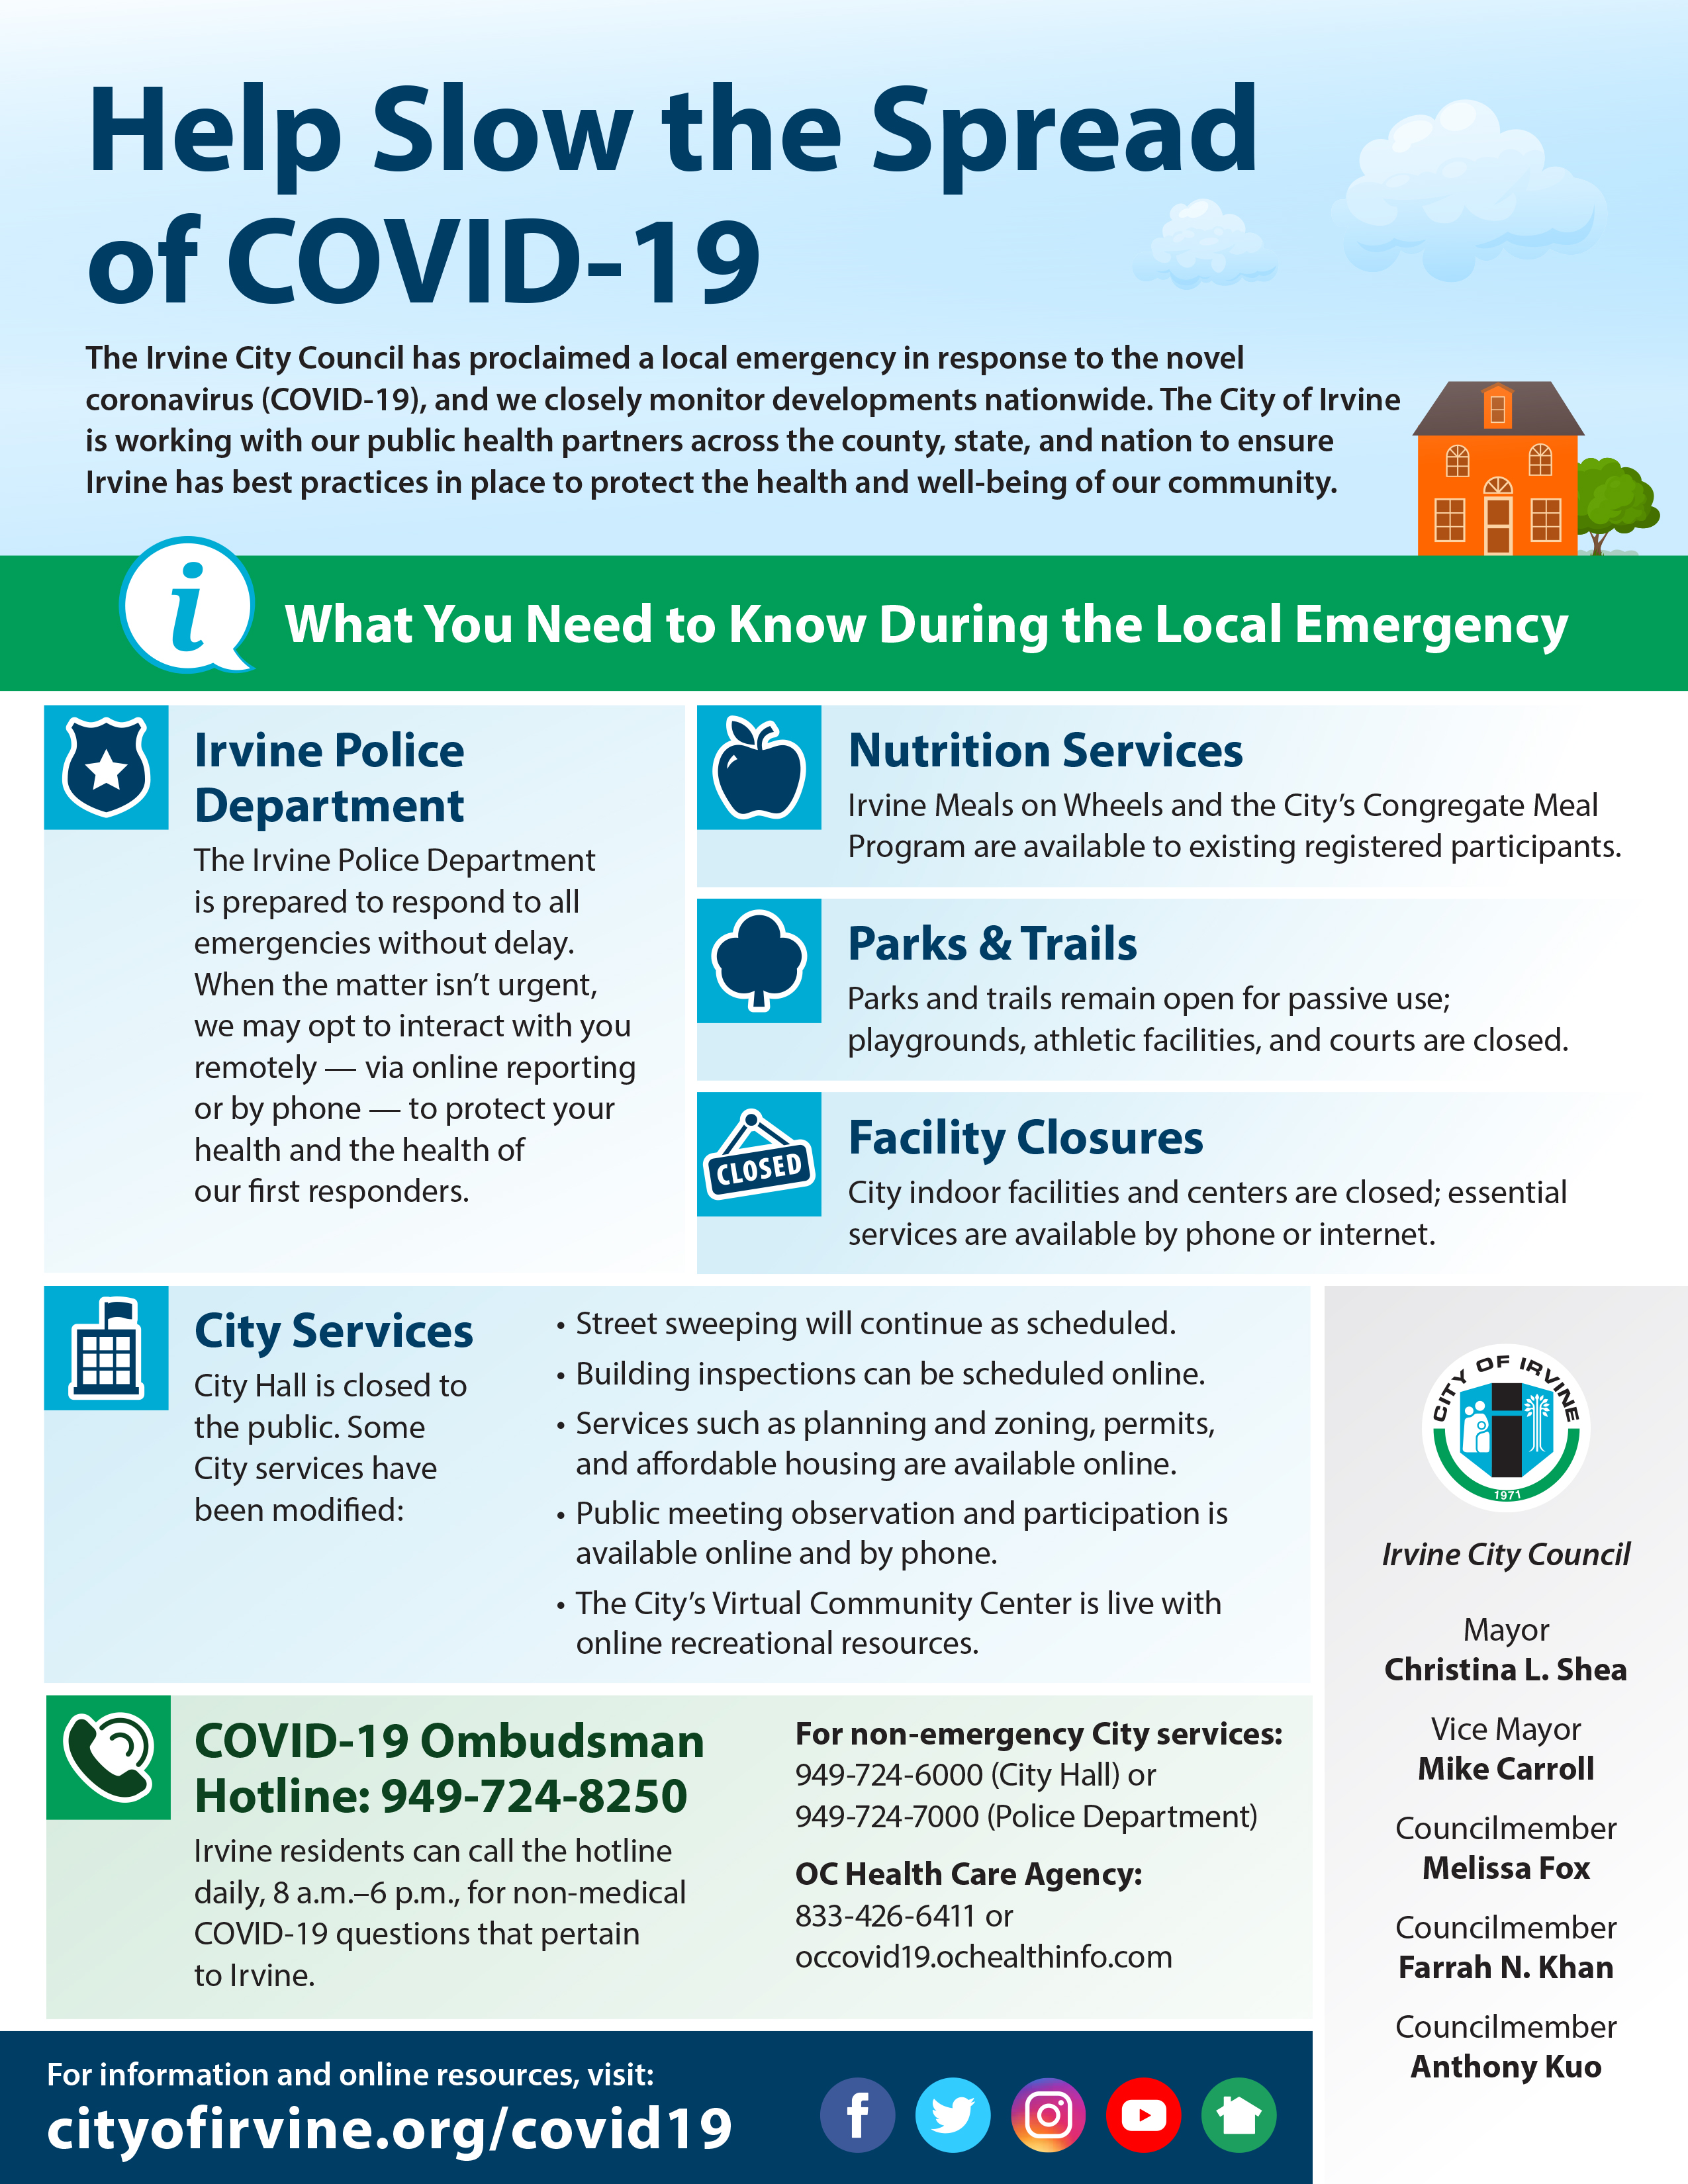 Help Slow the Spread of COVID-19